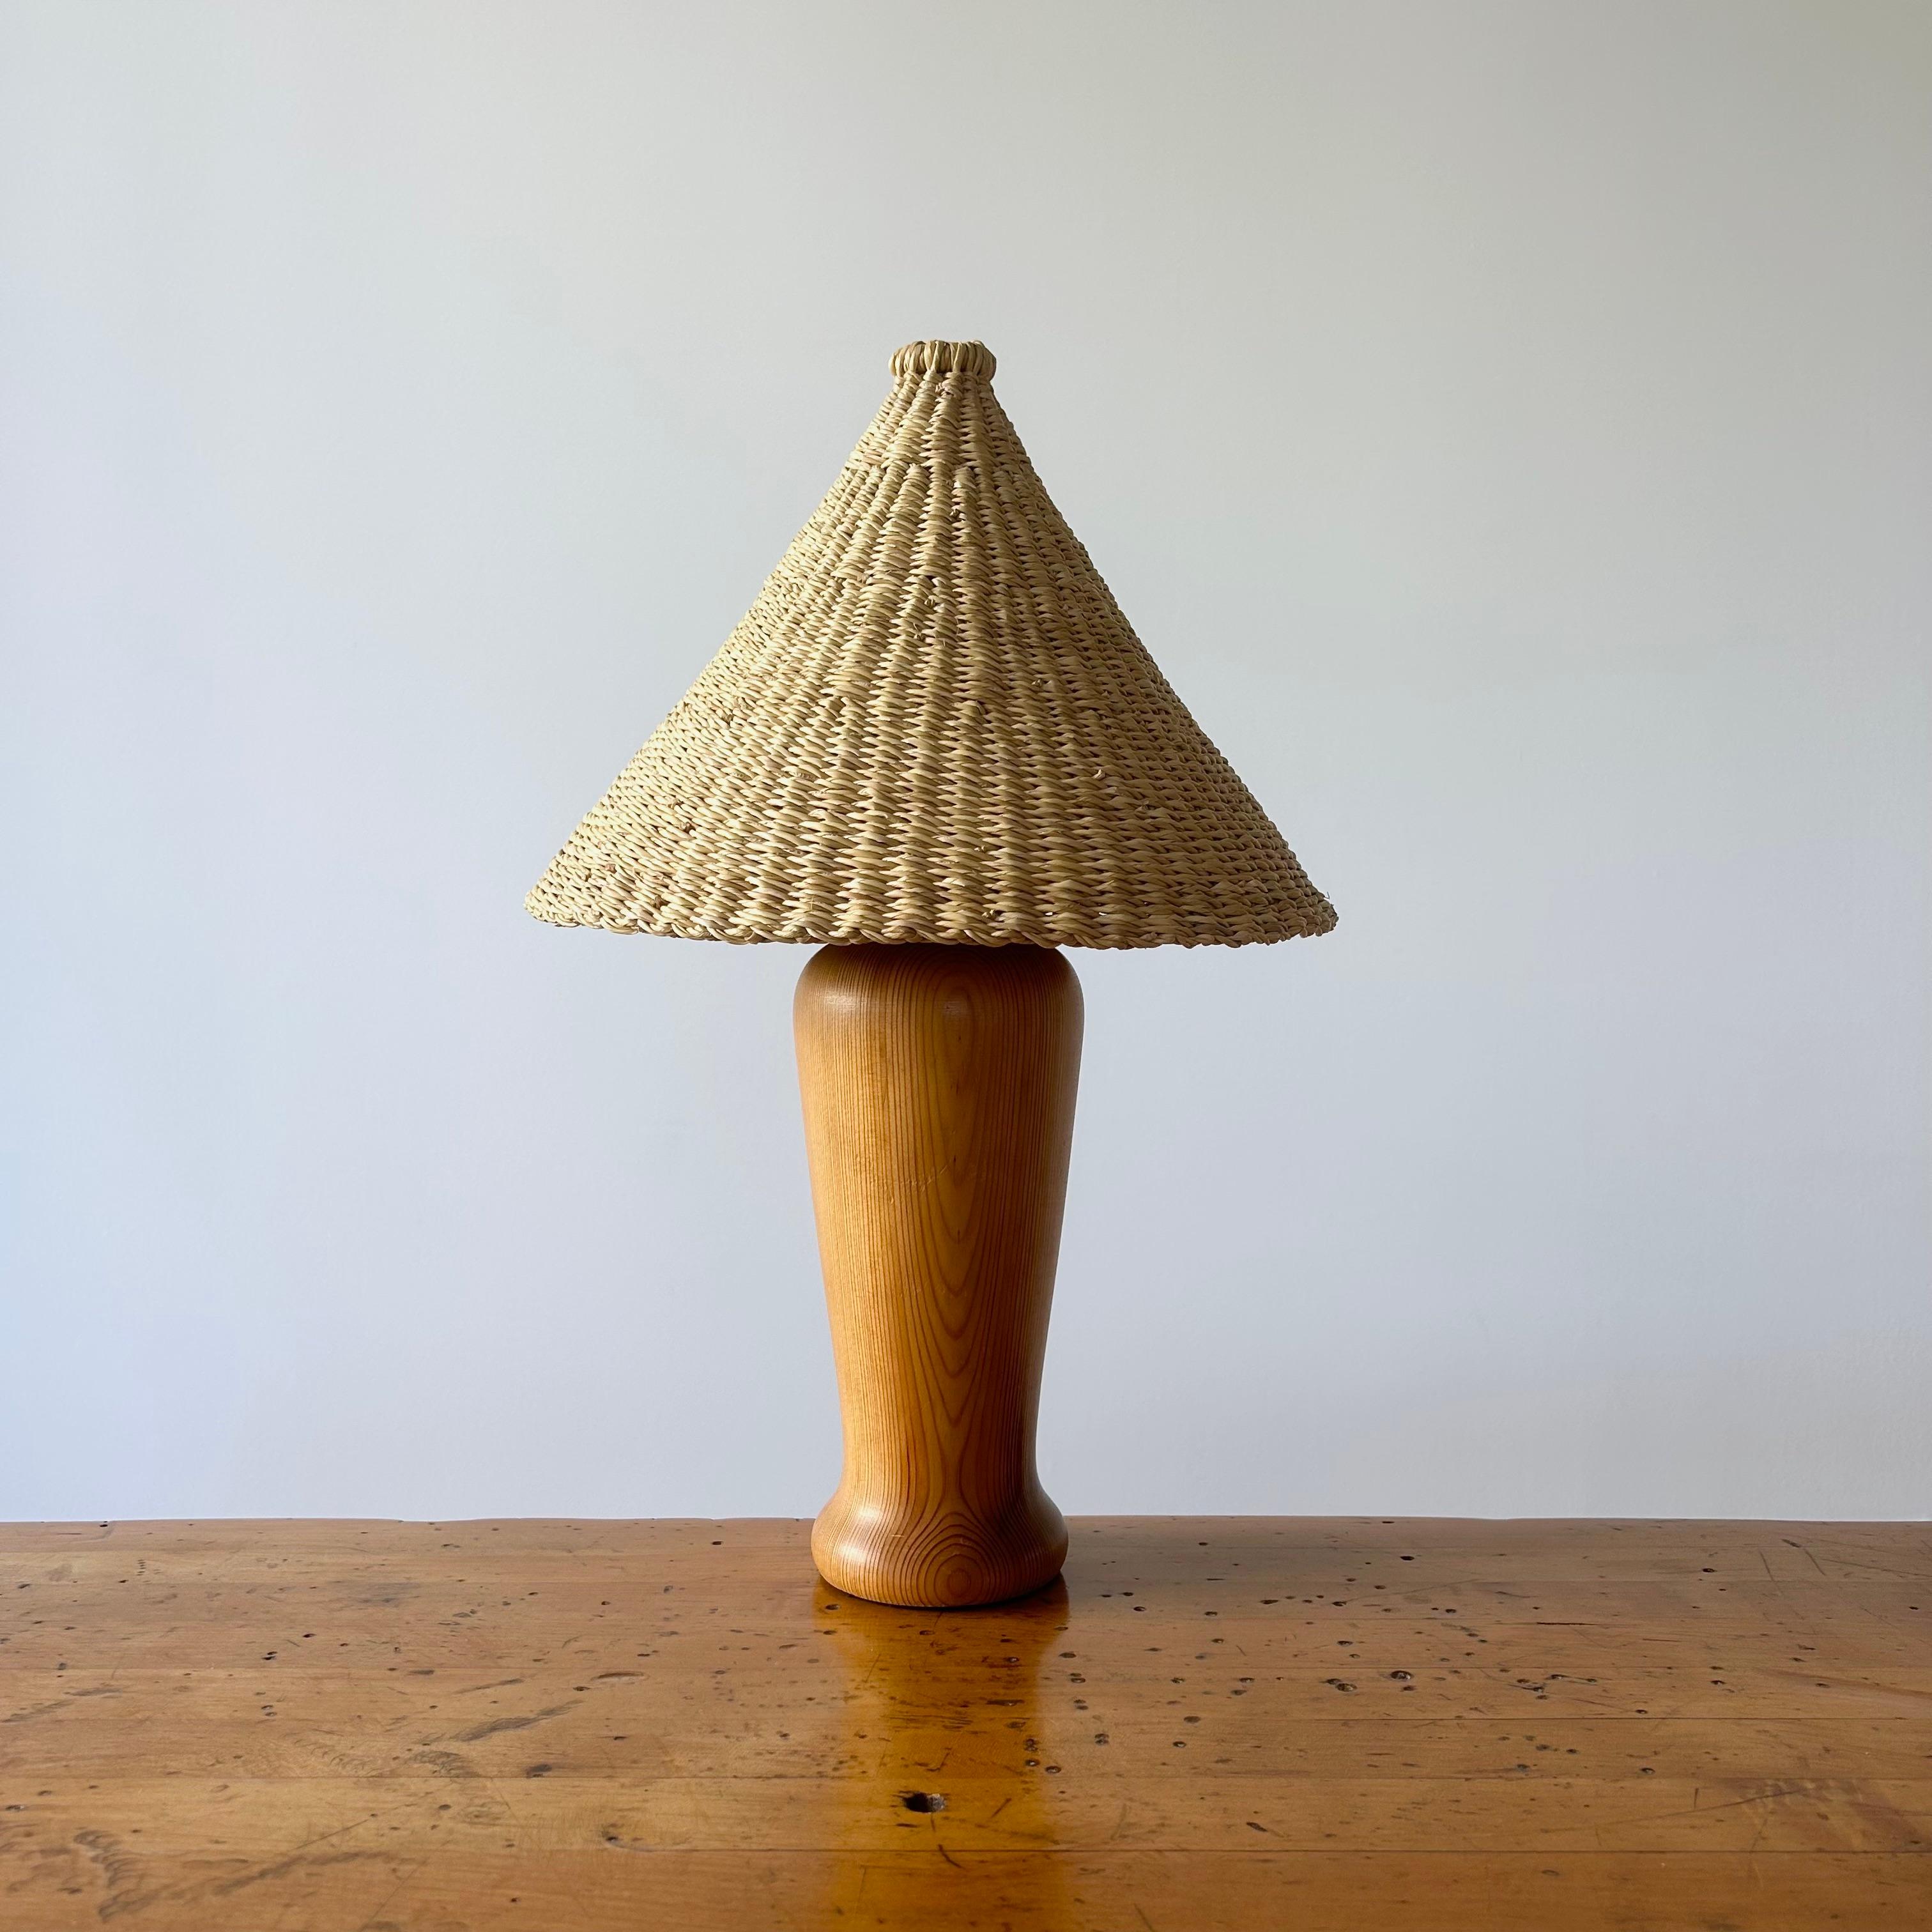 Beautifully proportioned vintage oak table lamp from the Netherlands circa 1980s. Good vintage condition. Rewired in LA and refreshed with our elephant grass shade. One available.

Light shade handwoven by a women's organization for traditional arts